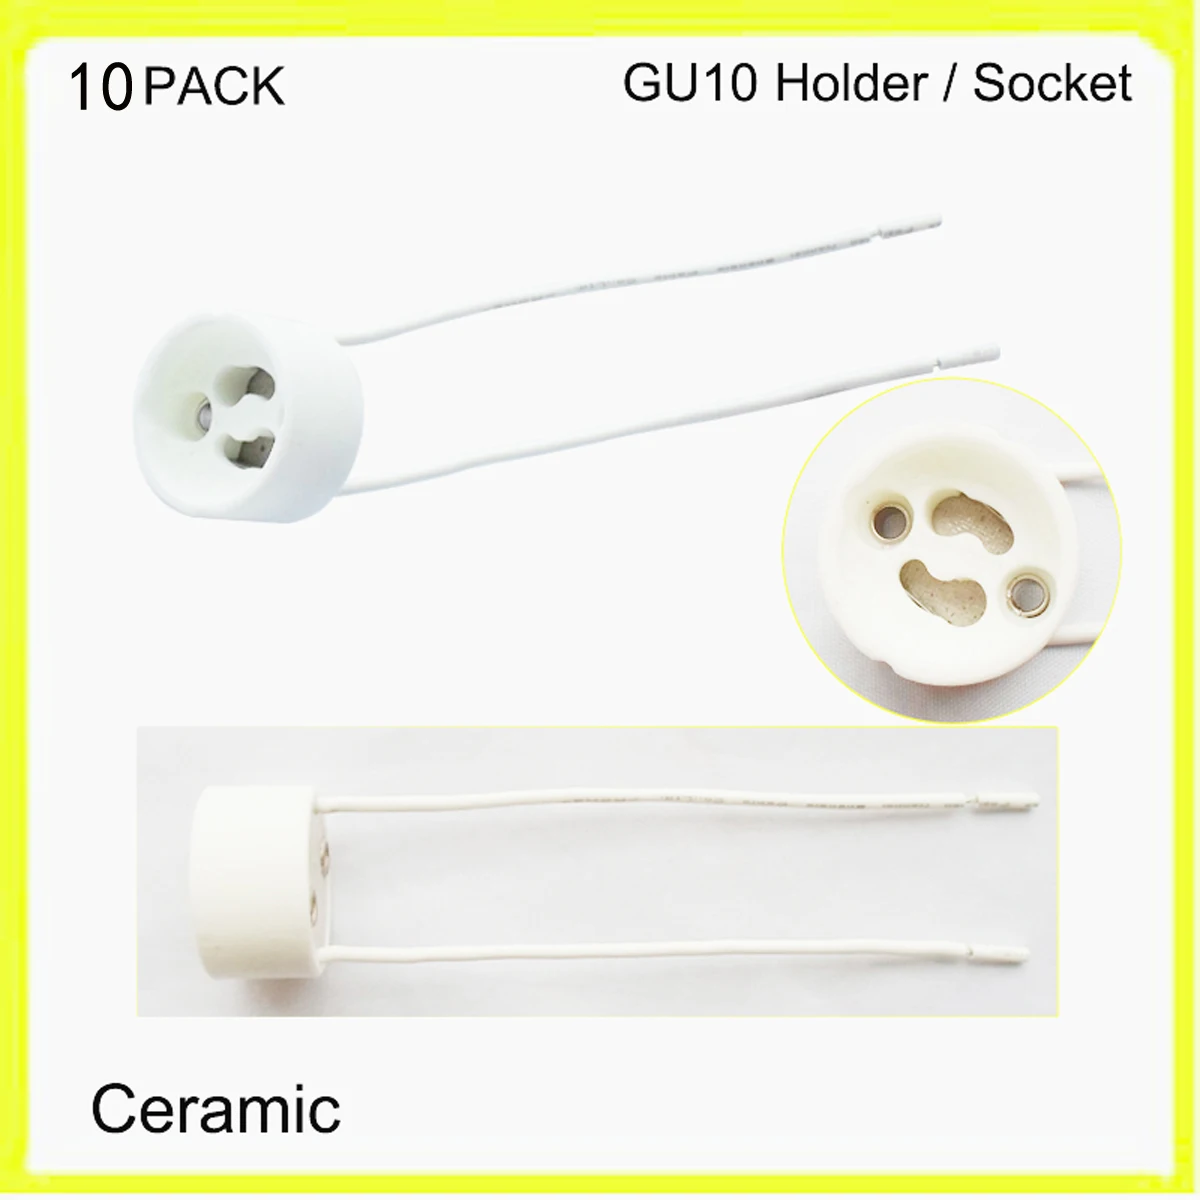 wholesale and retail 8pc 9pin ceramic vacuum tube socket valve base for el504 el519 audio amps parts free shipping 10 PACK Ceramic MR16 GU10 Holder Spotlight Accessories Socket GU5.3 Base 10cm Wires Light Fittings Free Shipping